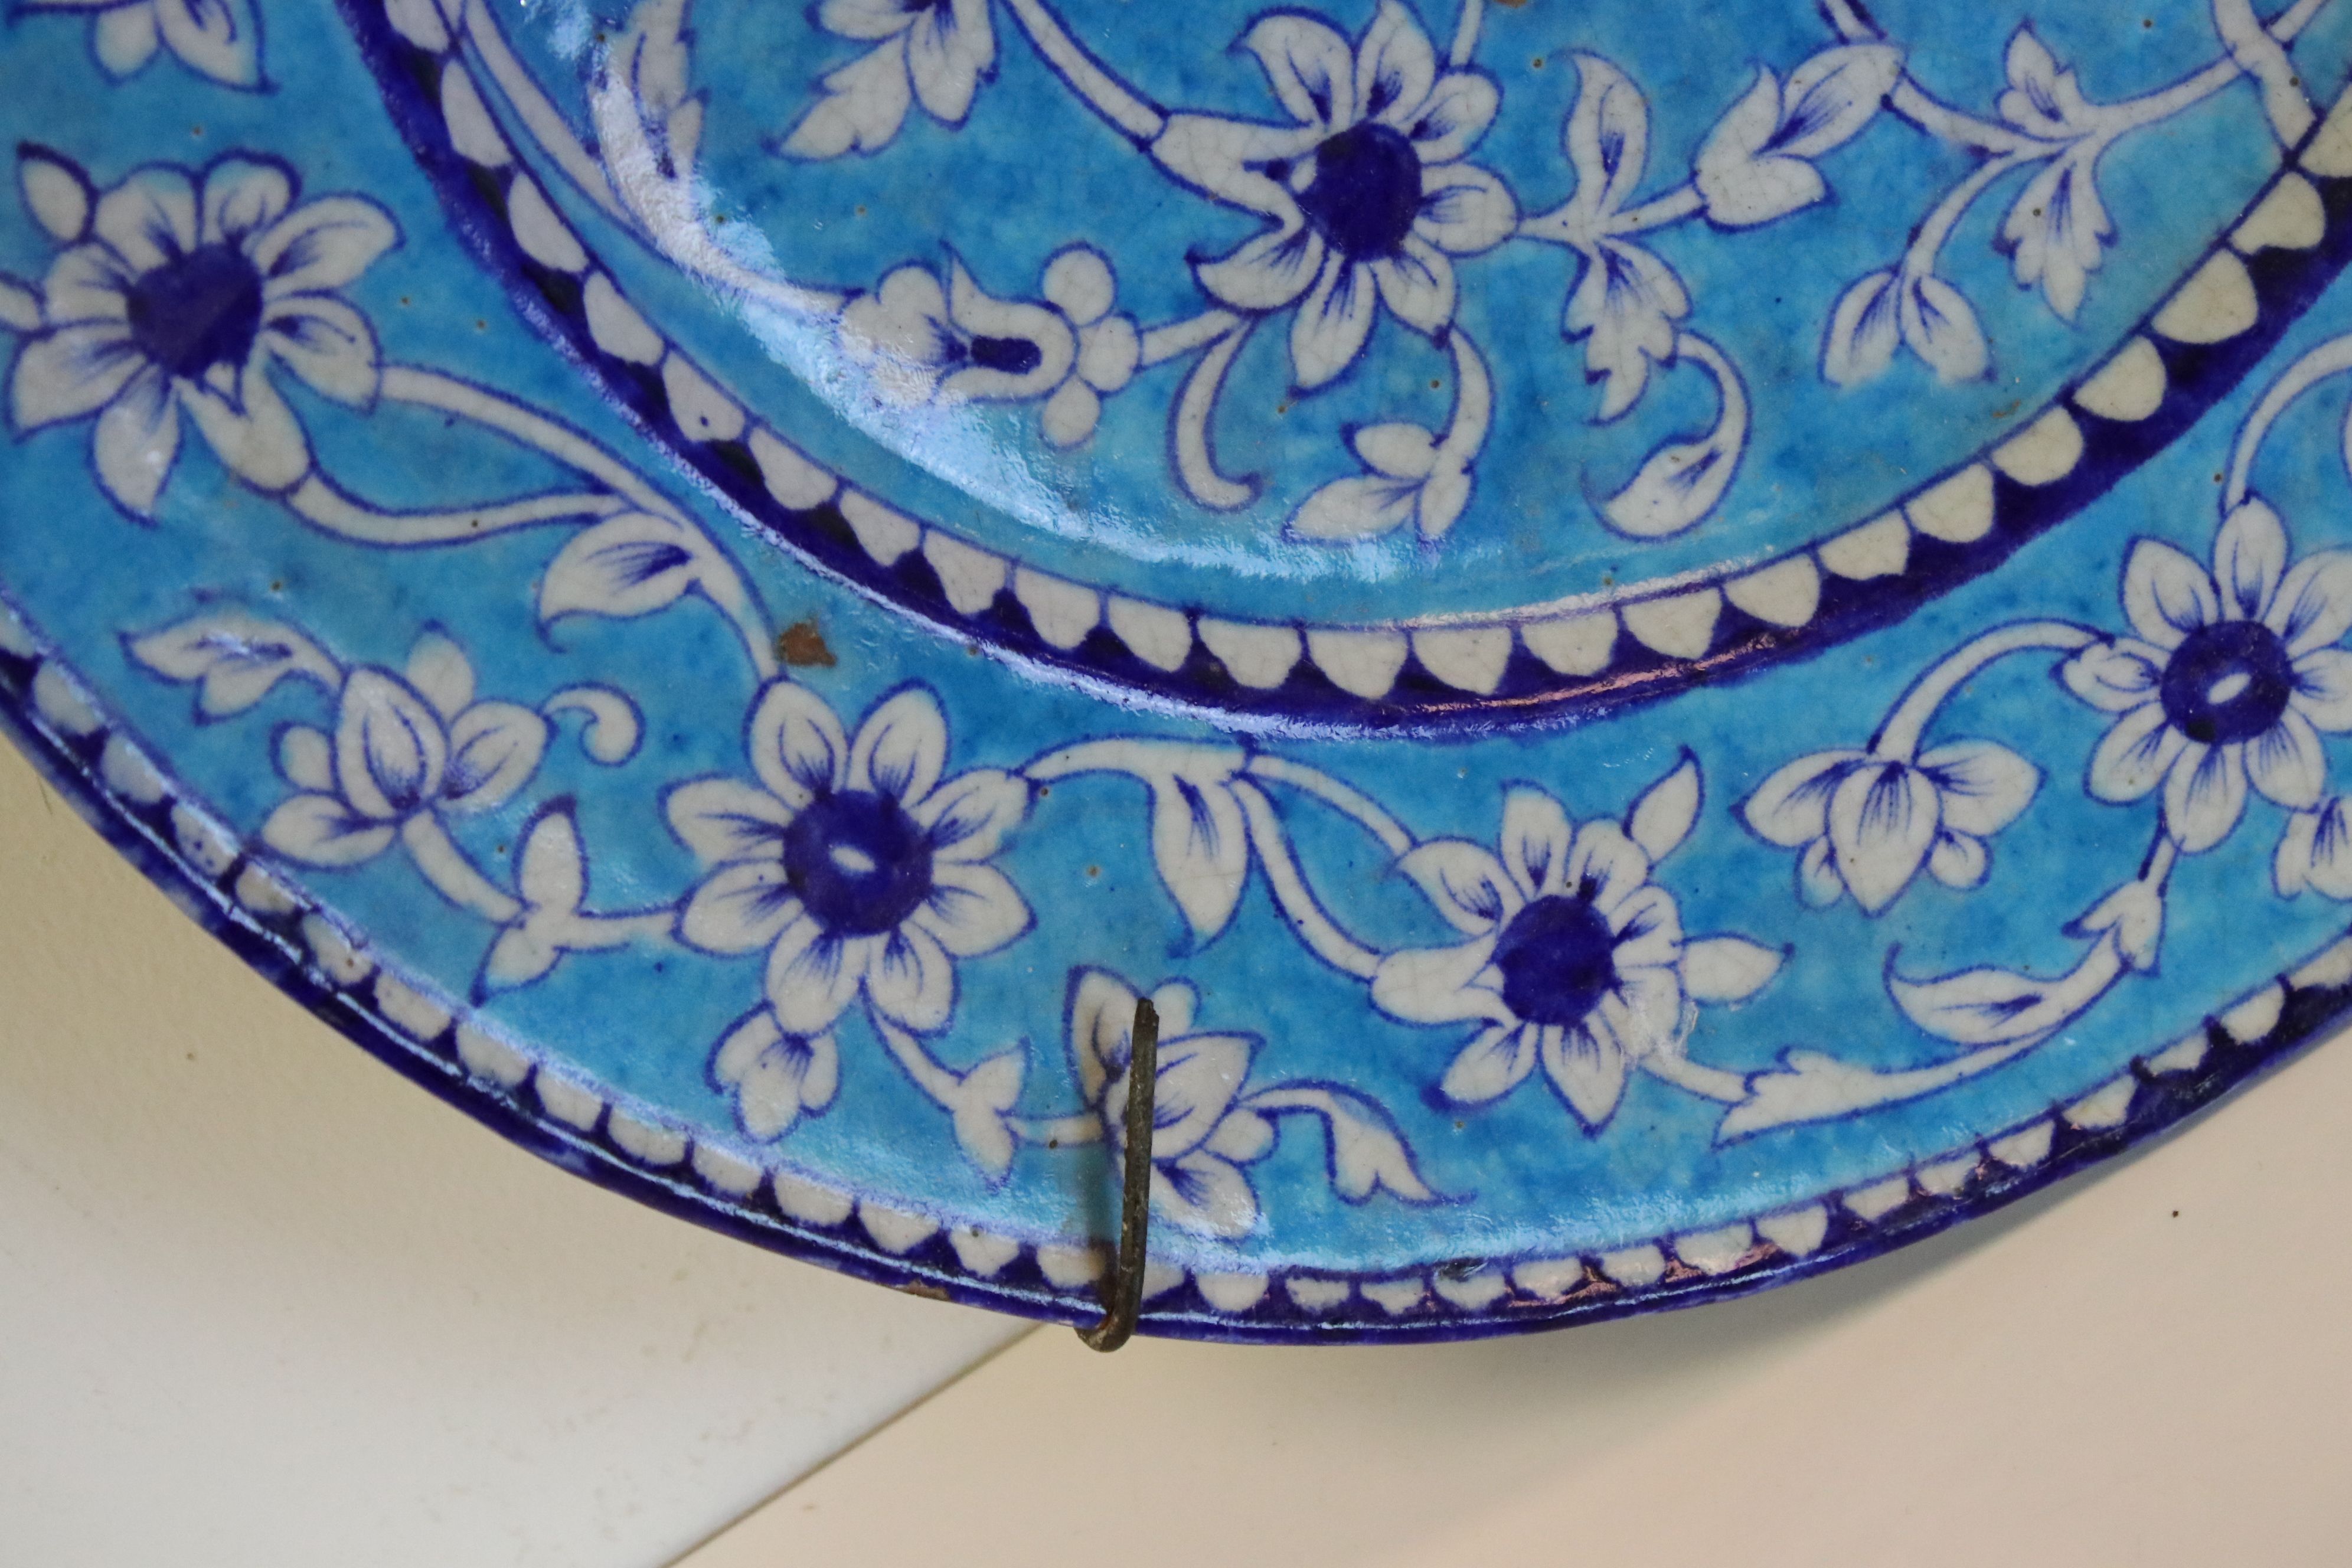 Large Iznic style ceramic Charger with Floral decoration on blue ground, 43cms diameter - Image 3 of 8